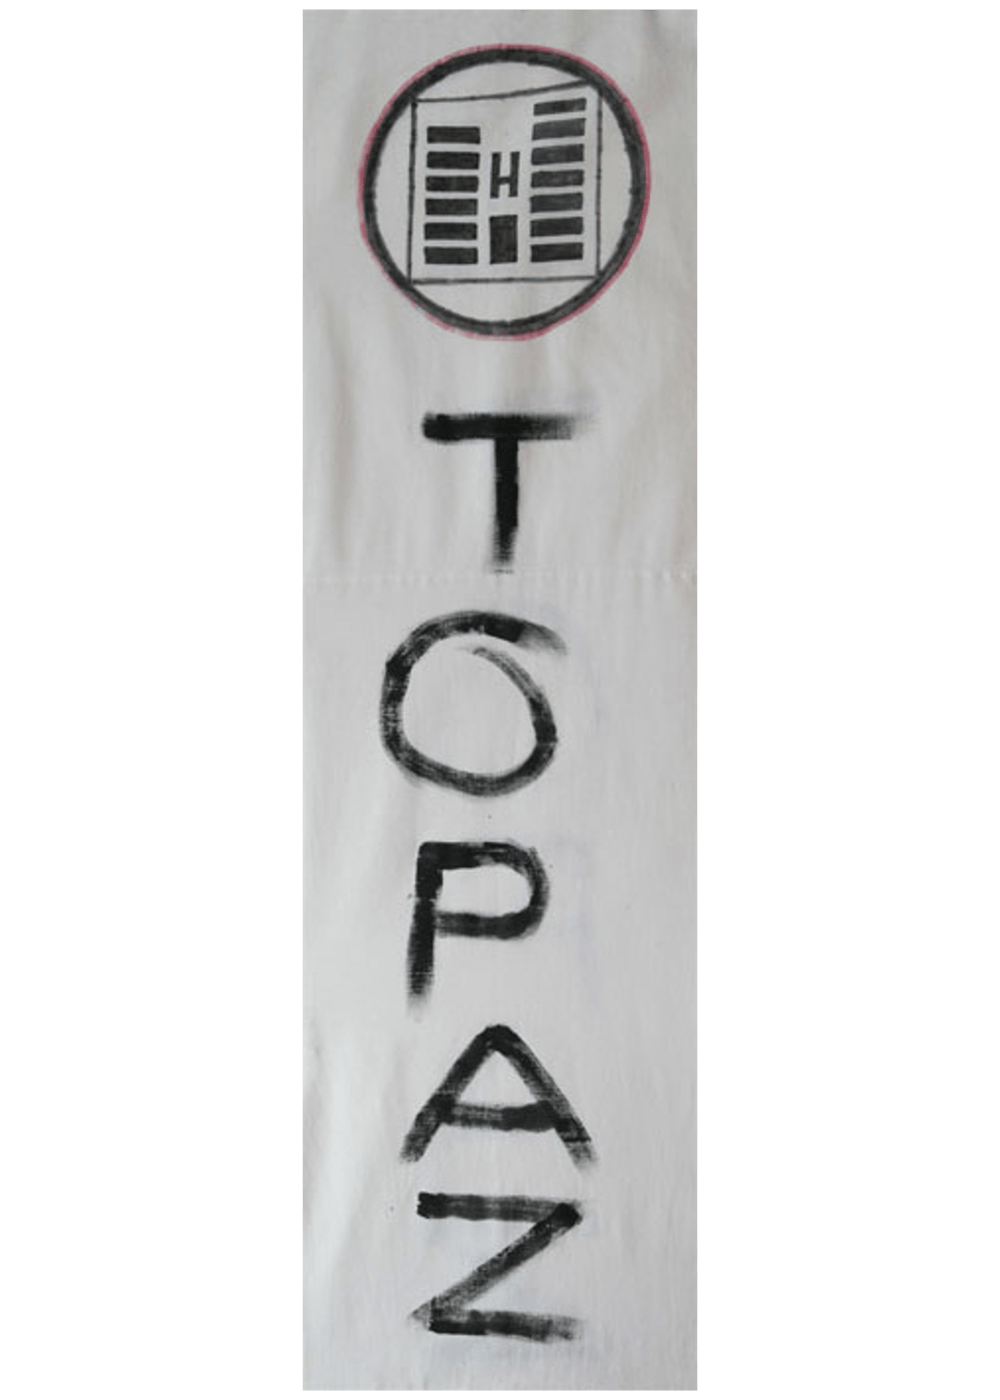 Banner made by former Topaz inmates, courtesy Manzanar Committee and Manzanar National Historic Site